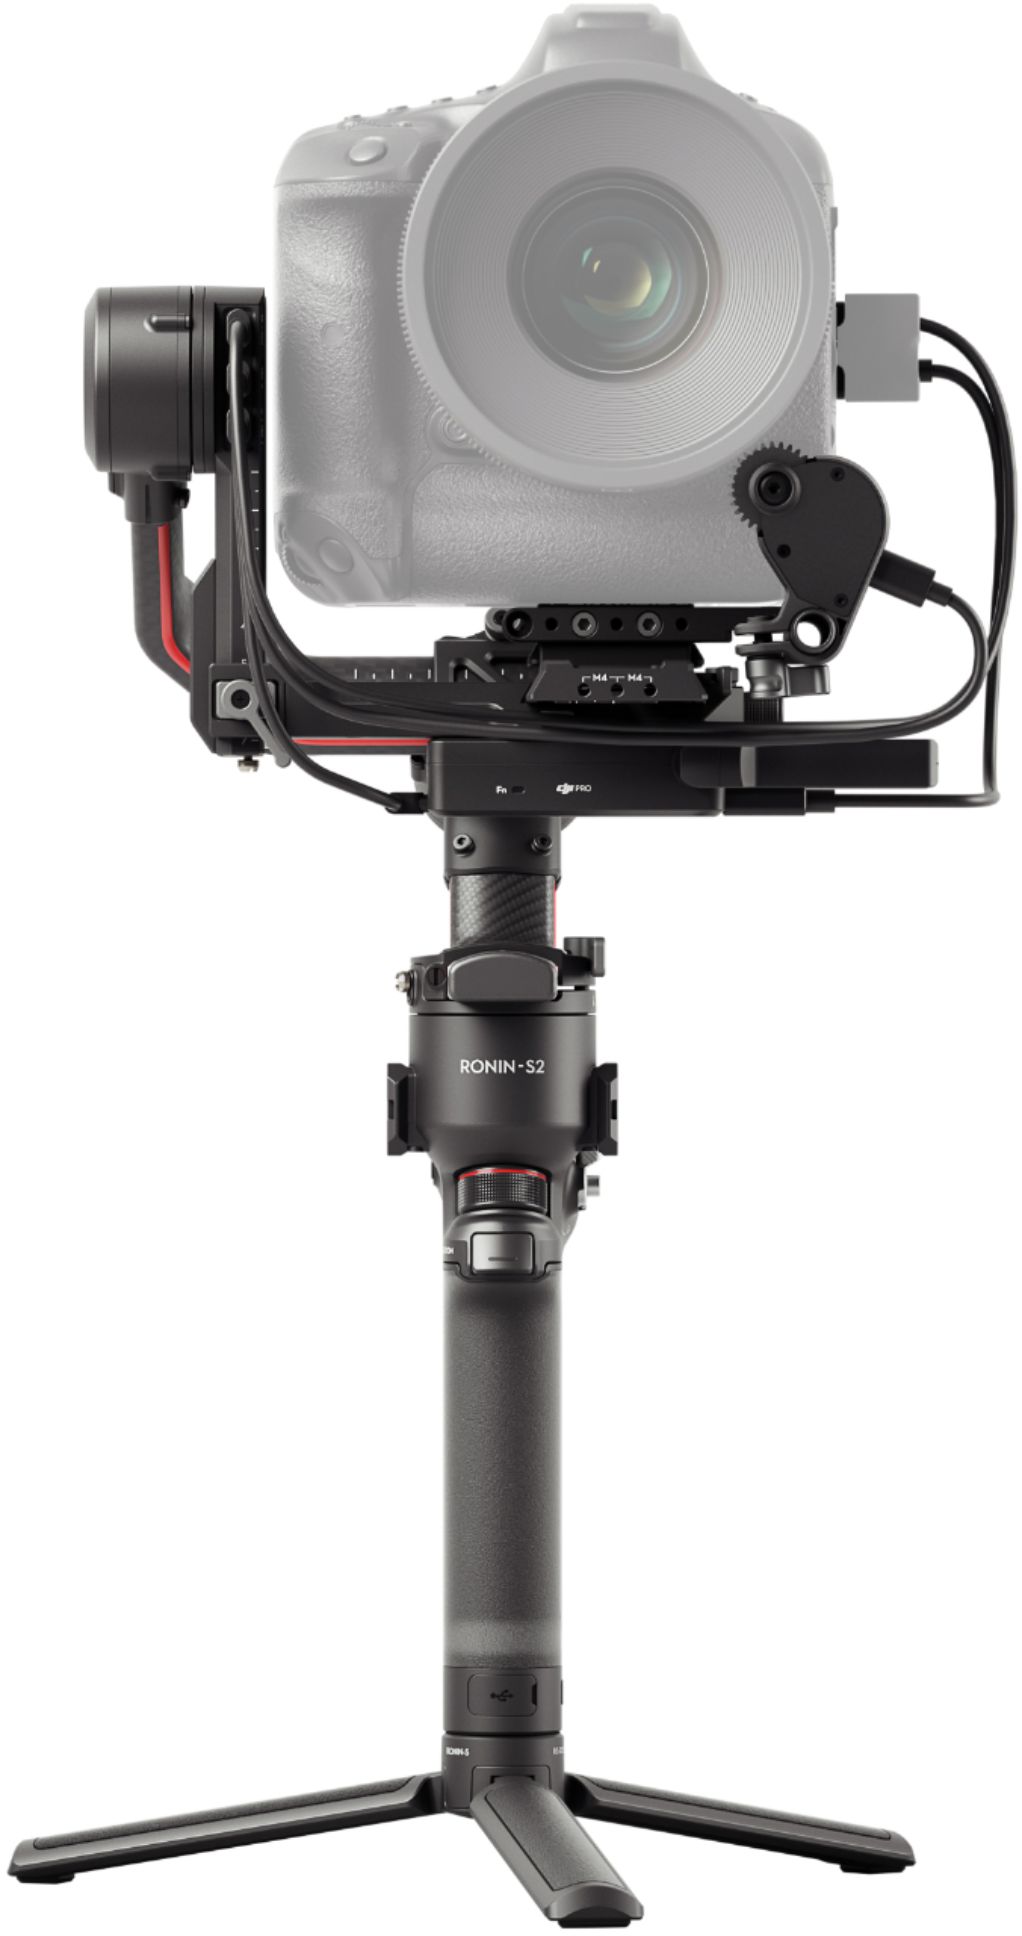 Angle View: DJI - RS 3 Pro 3-Axis Gimbal Stabilizer - Black